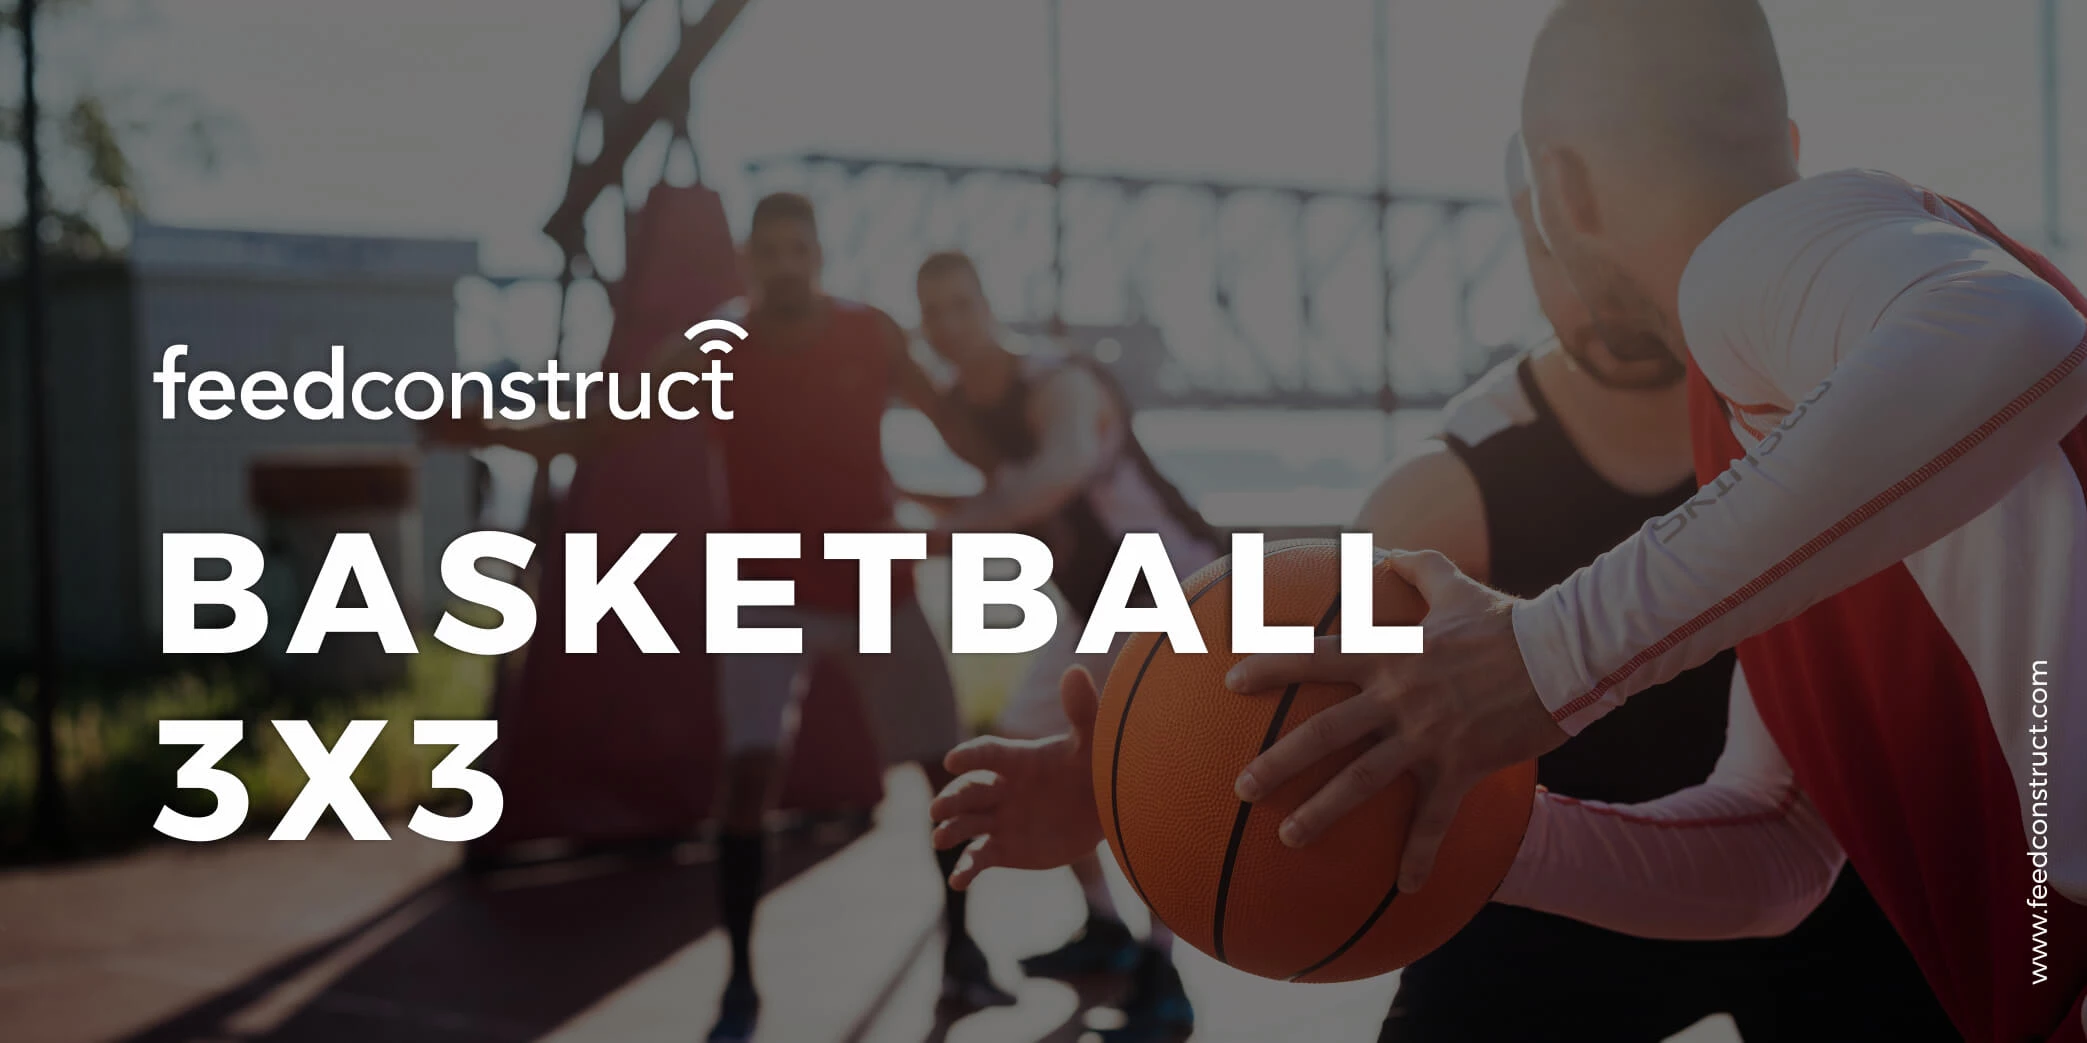 FeedConstruct adds data coverage for 3x3 Basketball